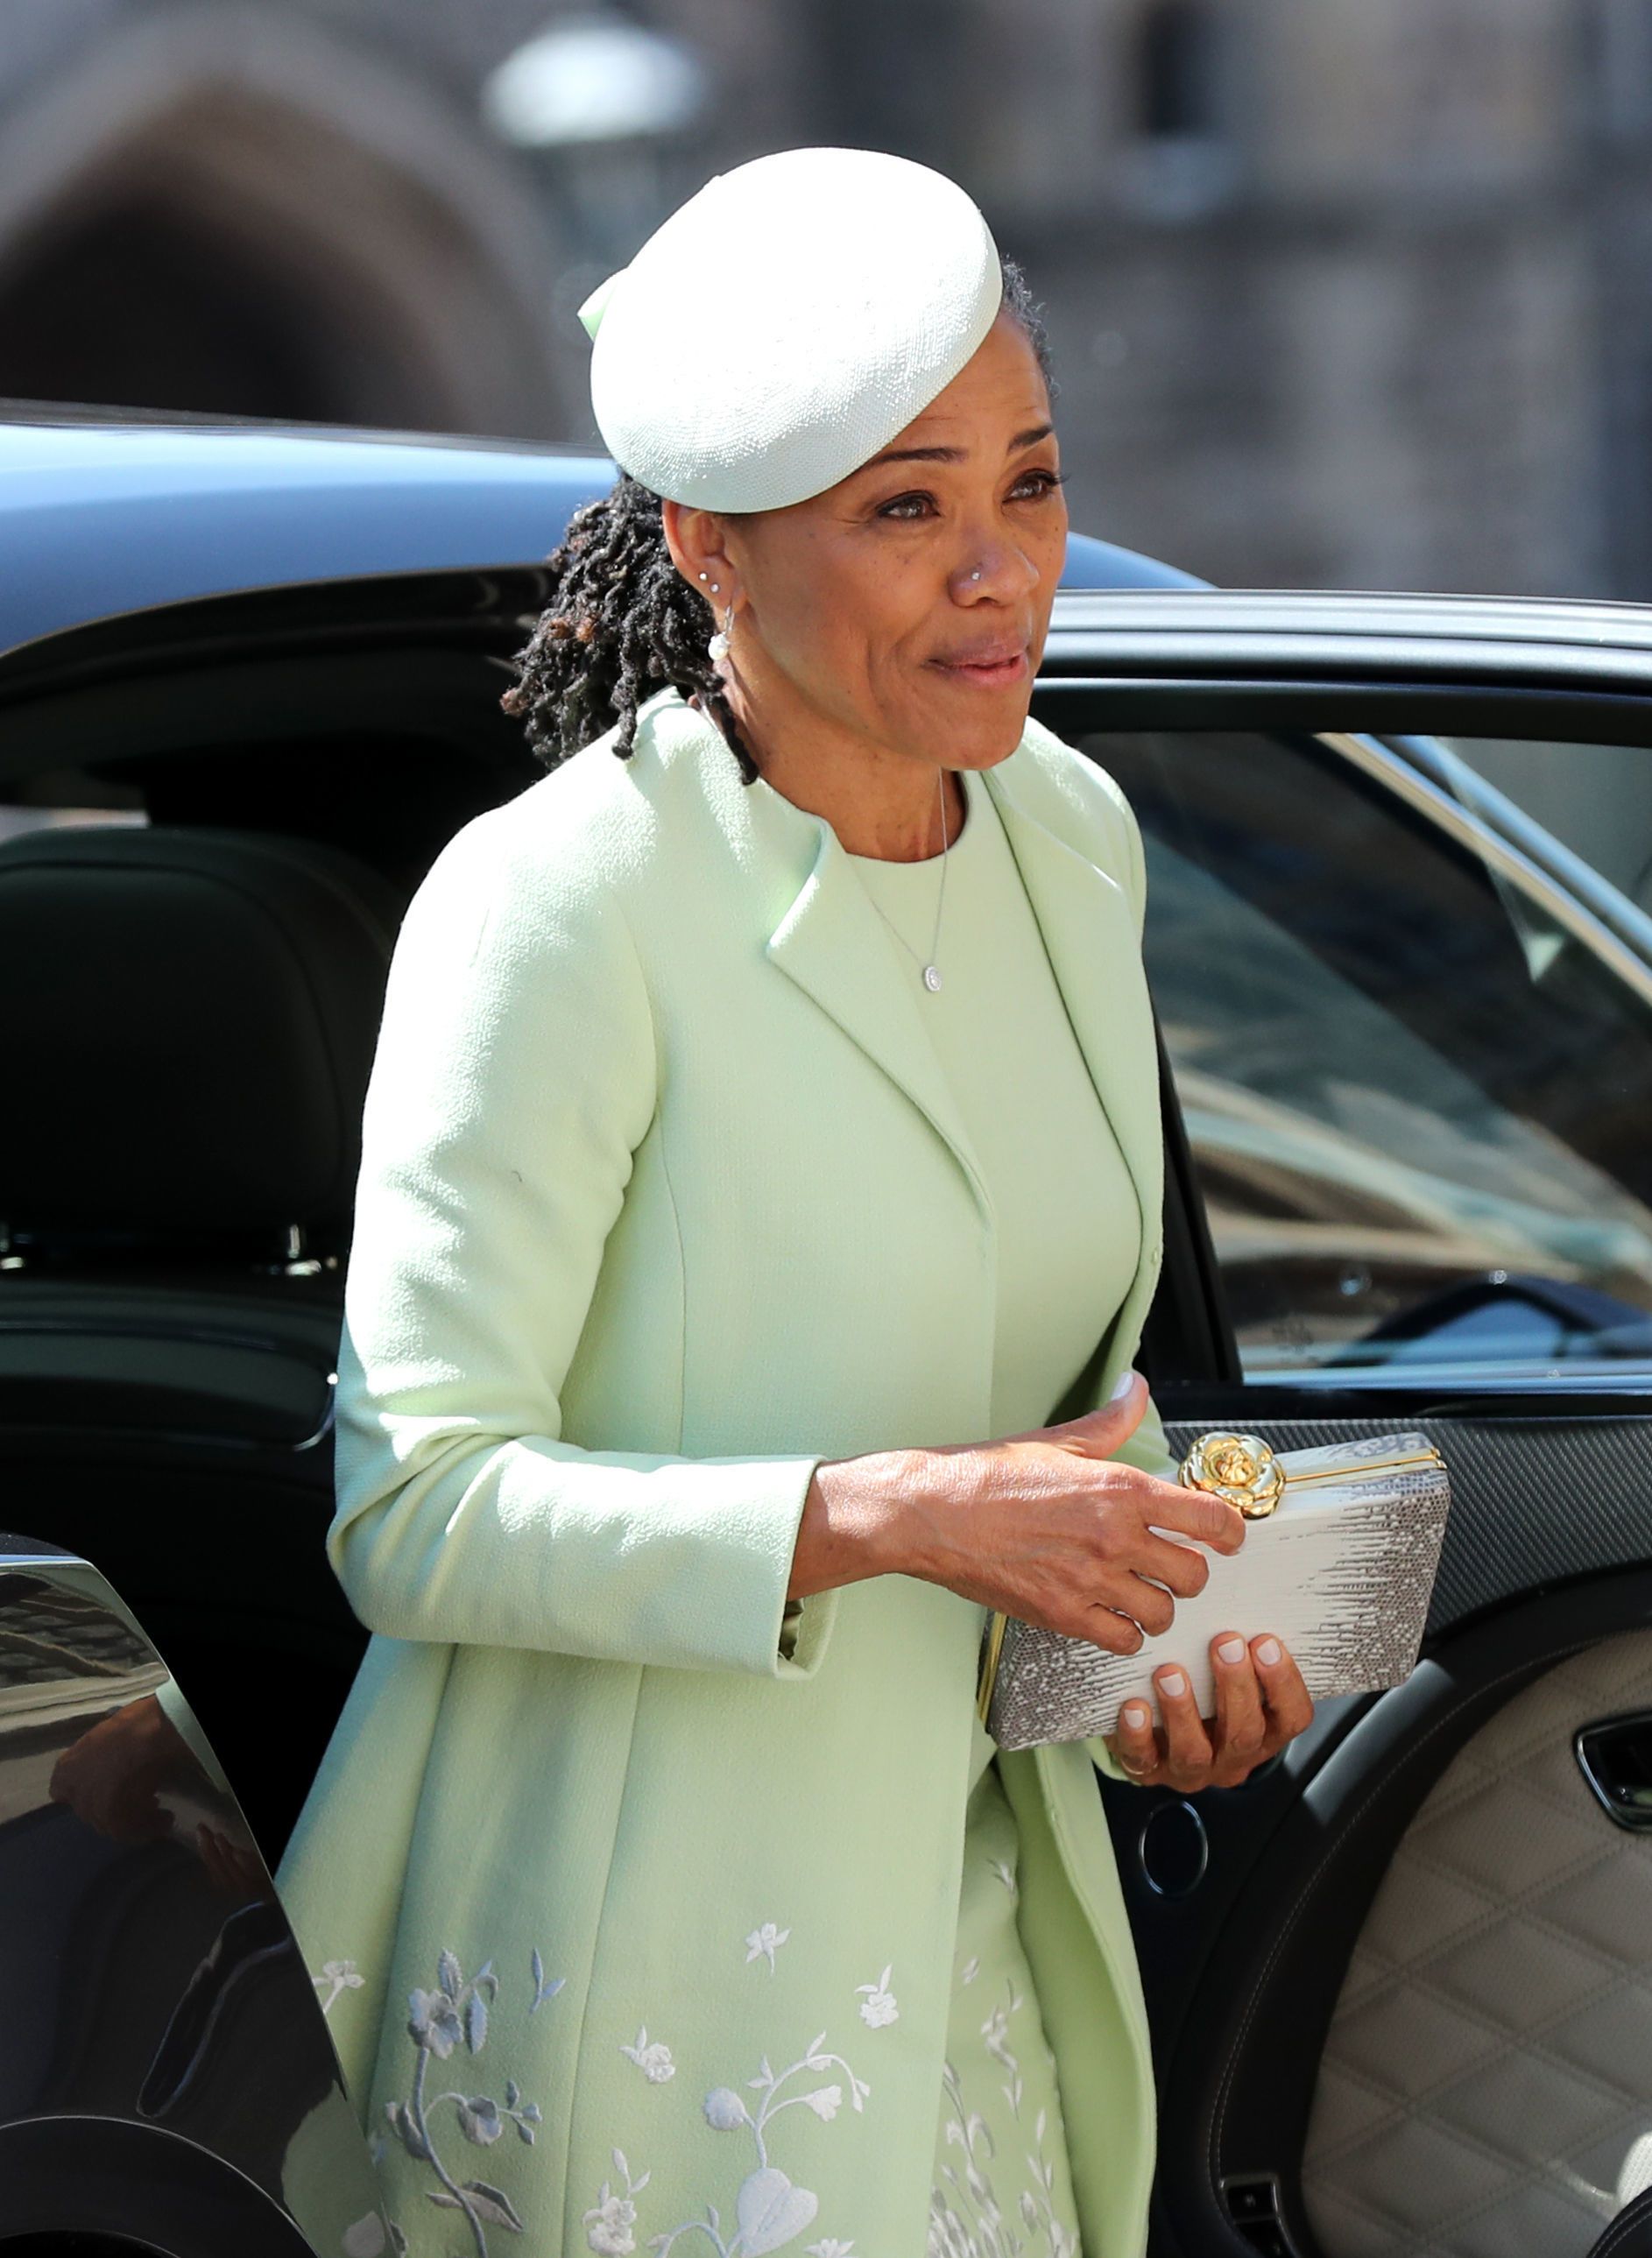 Doria Ragland before the wedding of Prince Harry and Meghan Markle on May 19, 2018 in Windsor, England. | Source: Getty Images